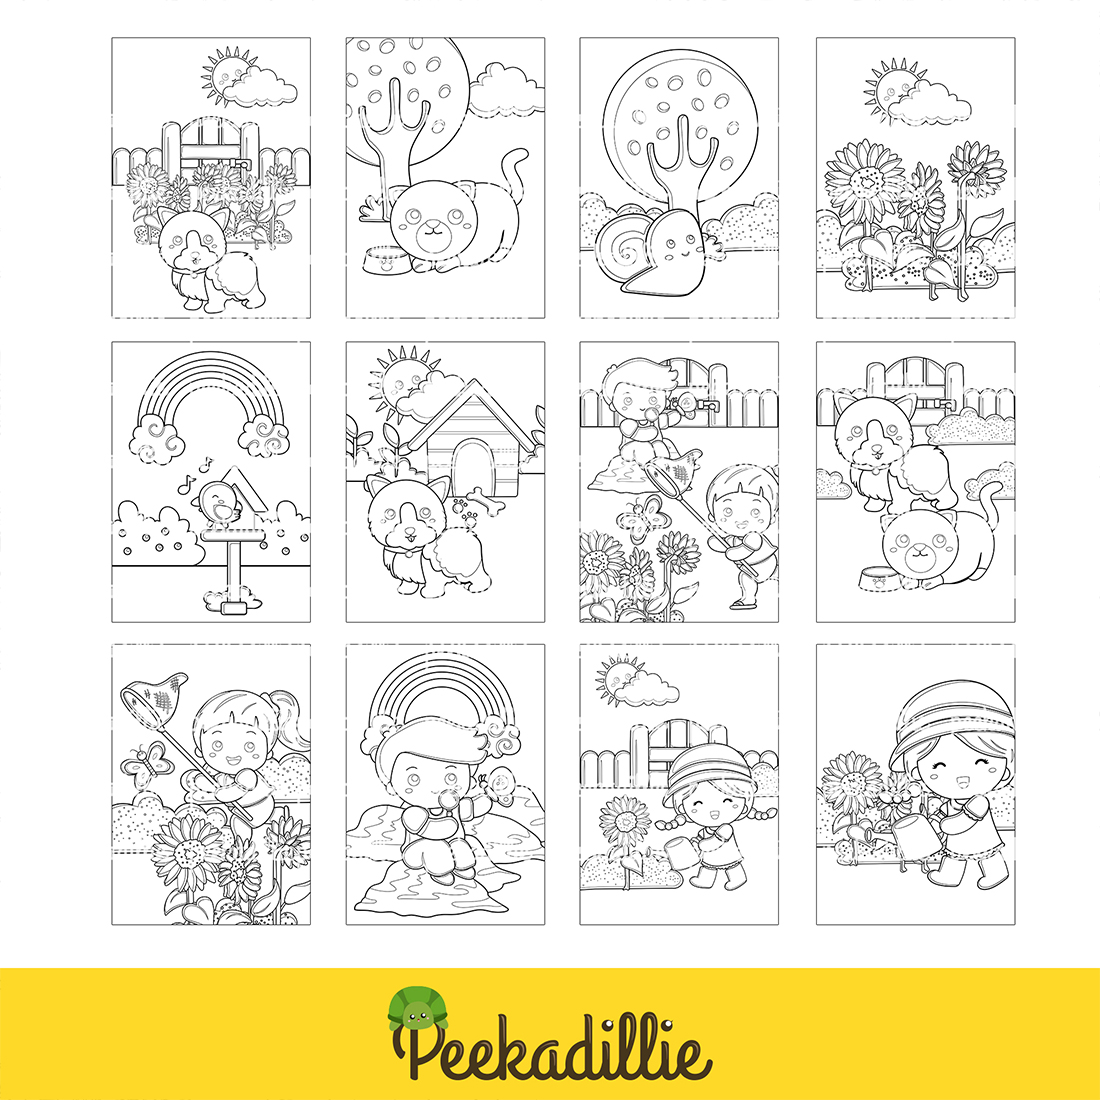 Kids Boy and Girl Playing in The Garden with Animals on Summer Holiday  Coloring Set